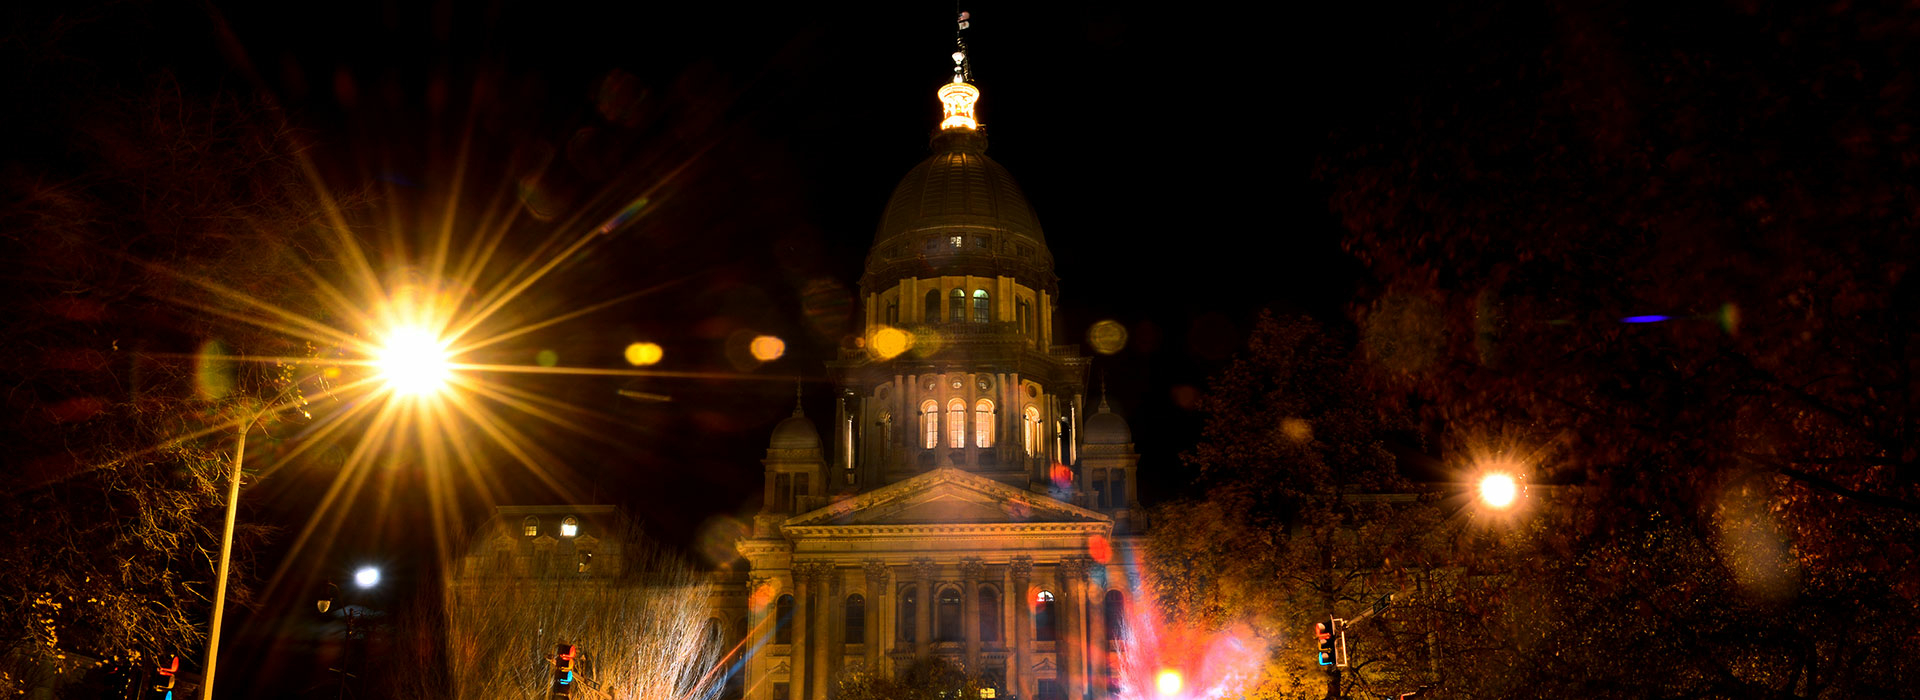 Illinois State Capitol at night